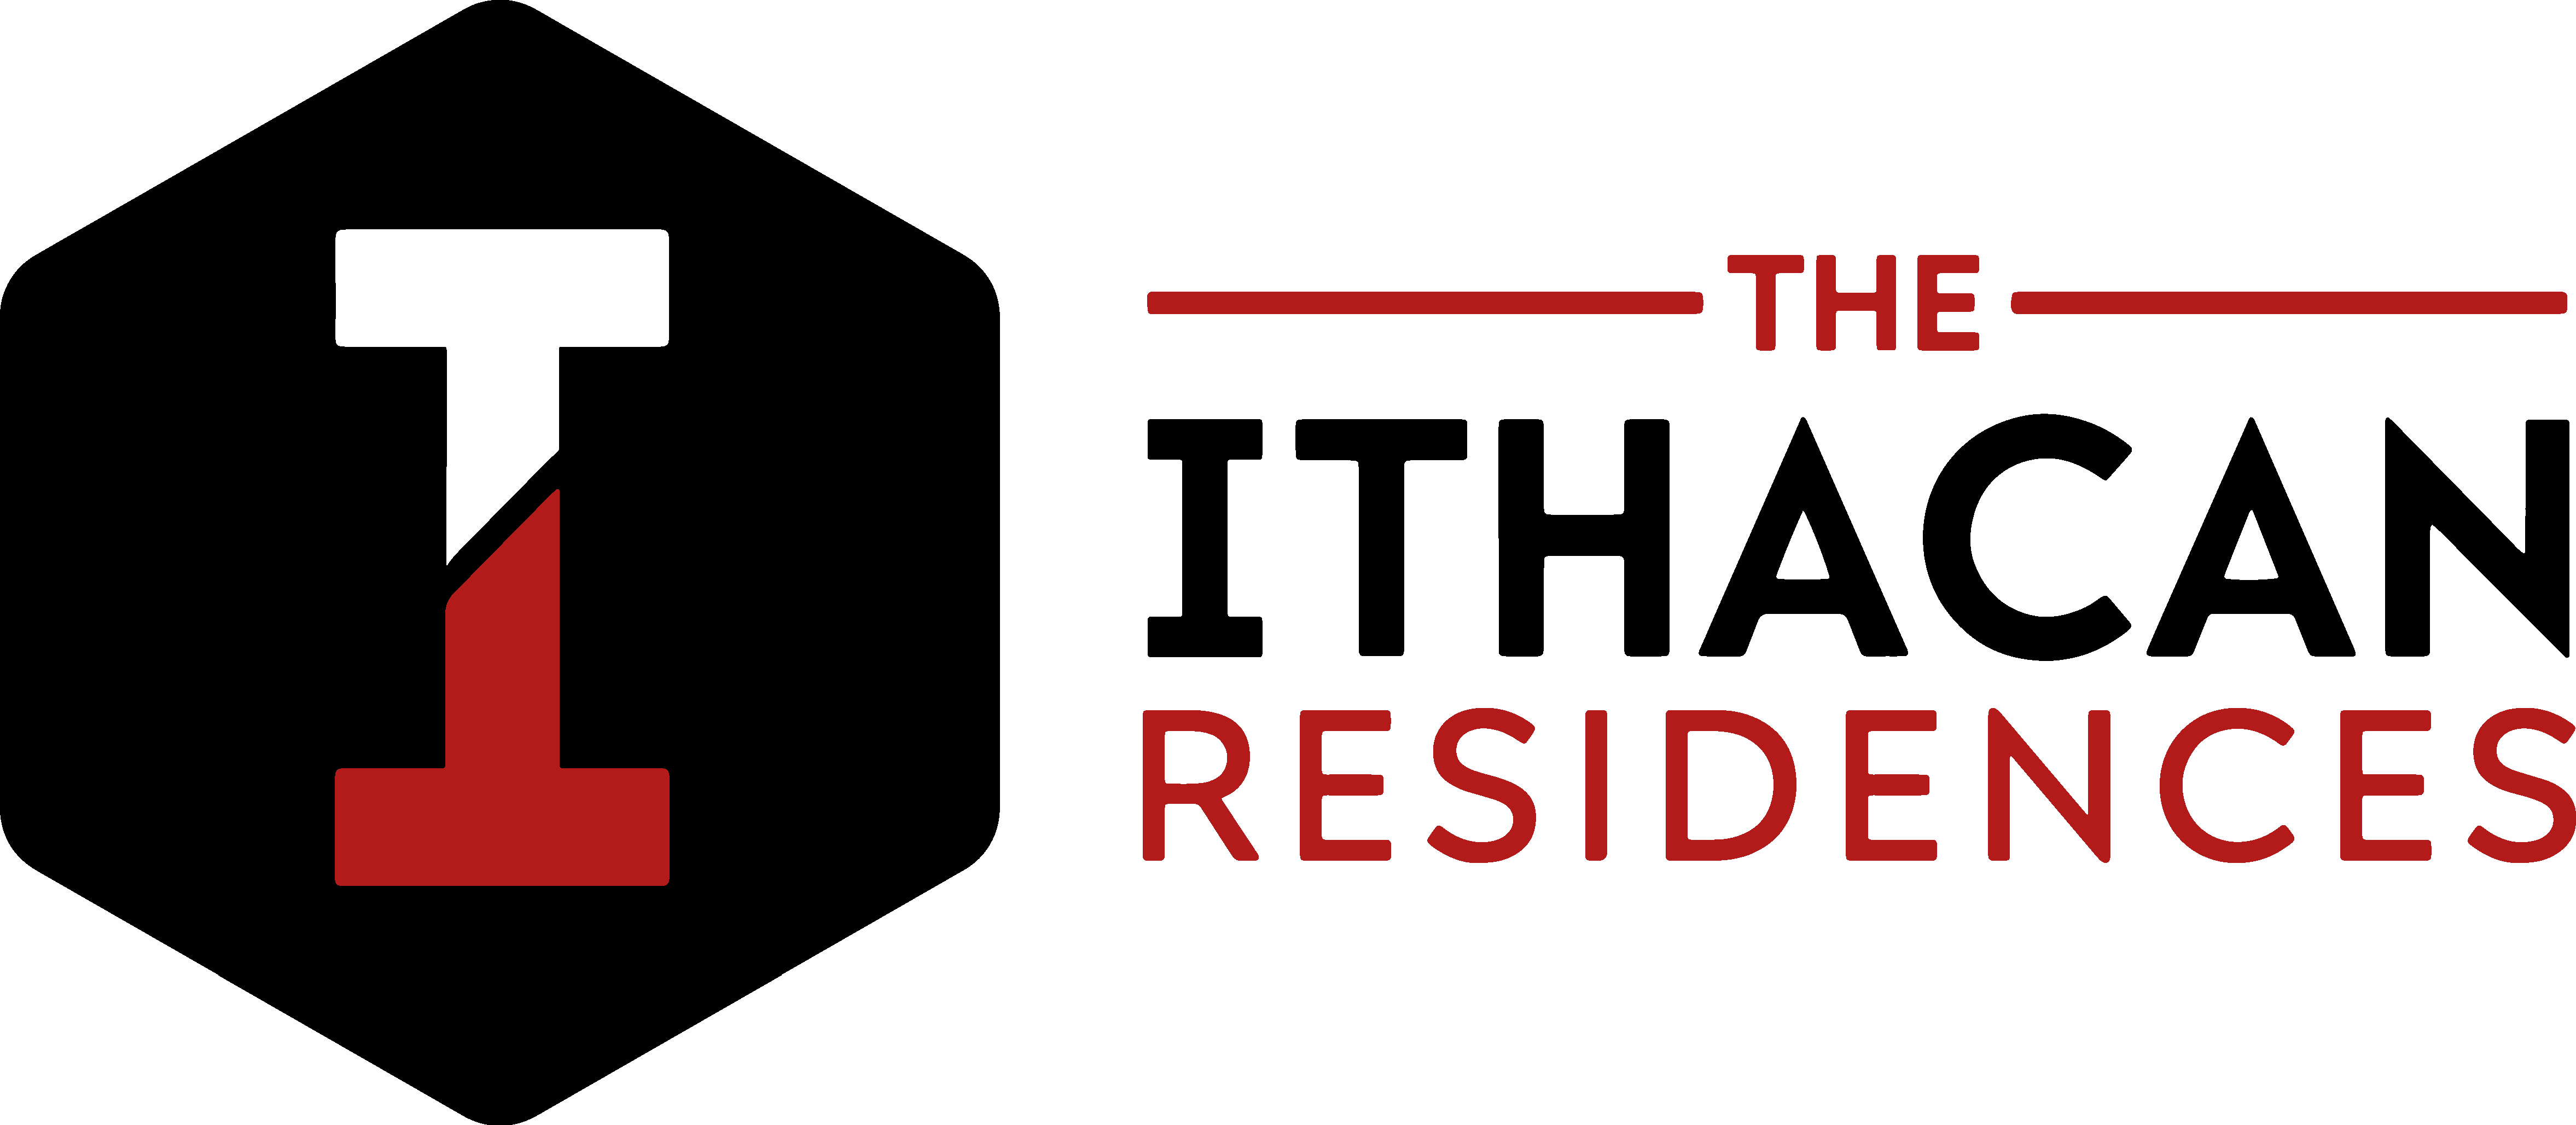 Ithaca logo with red, white and black colors